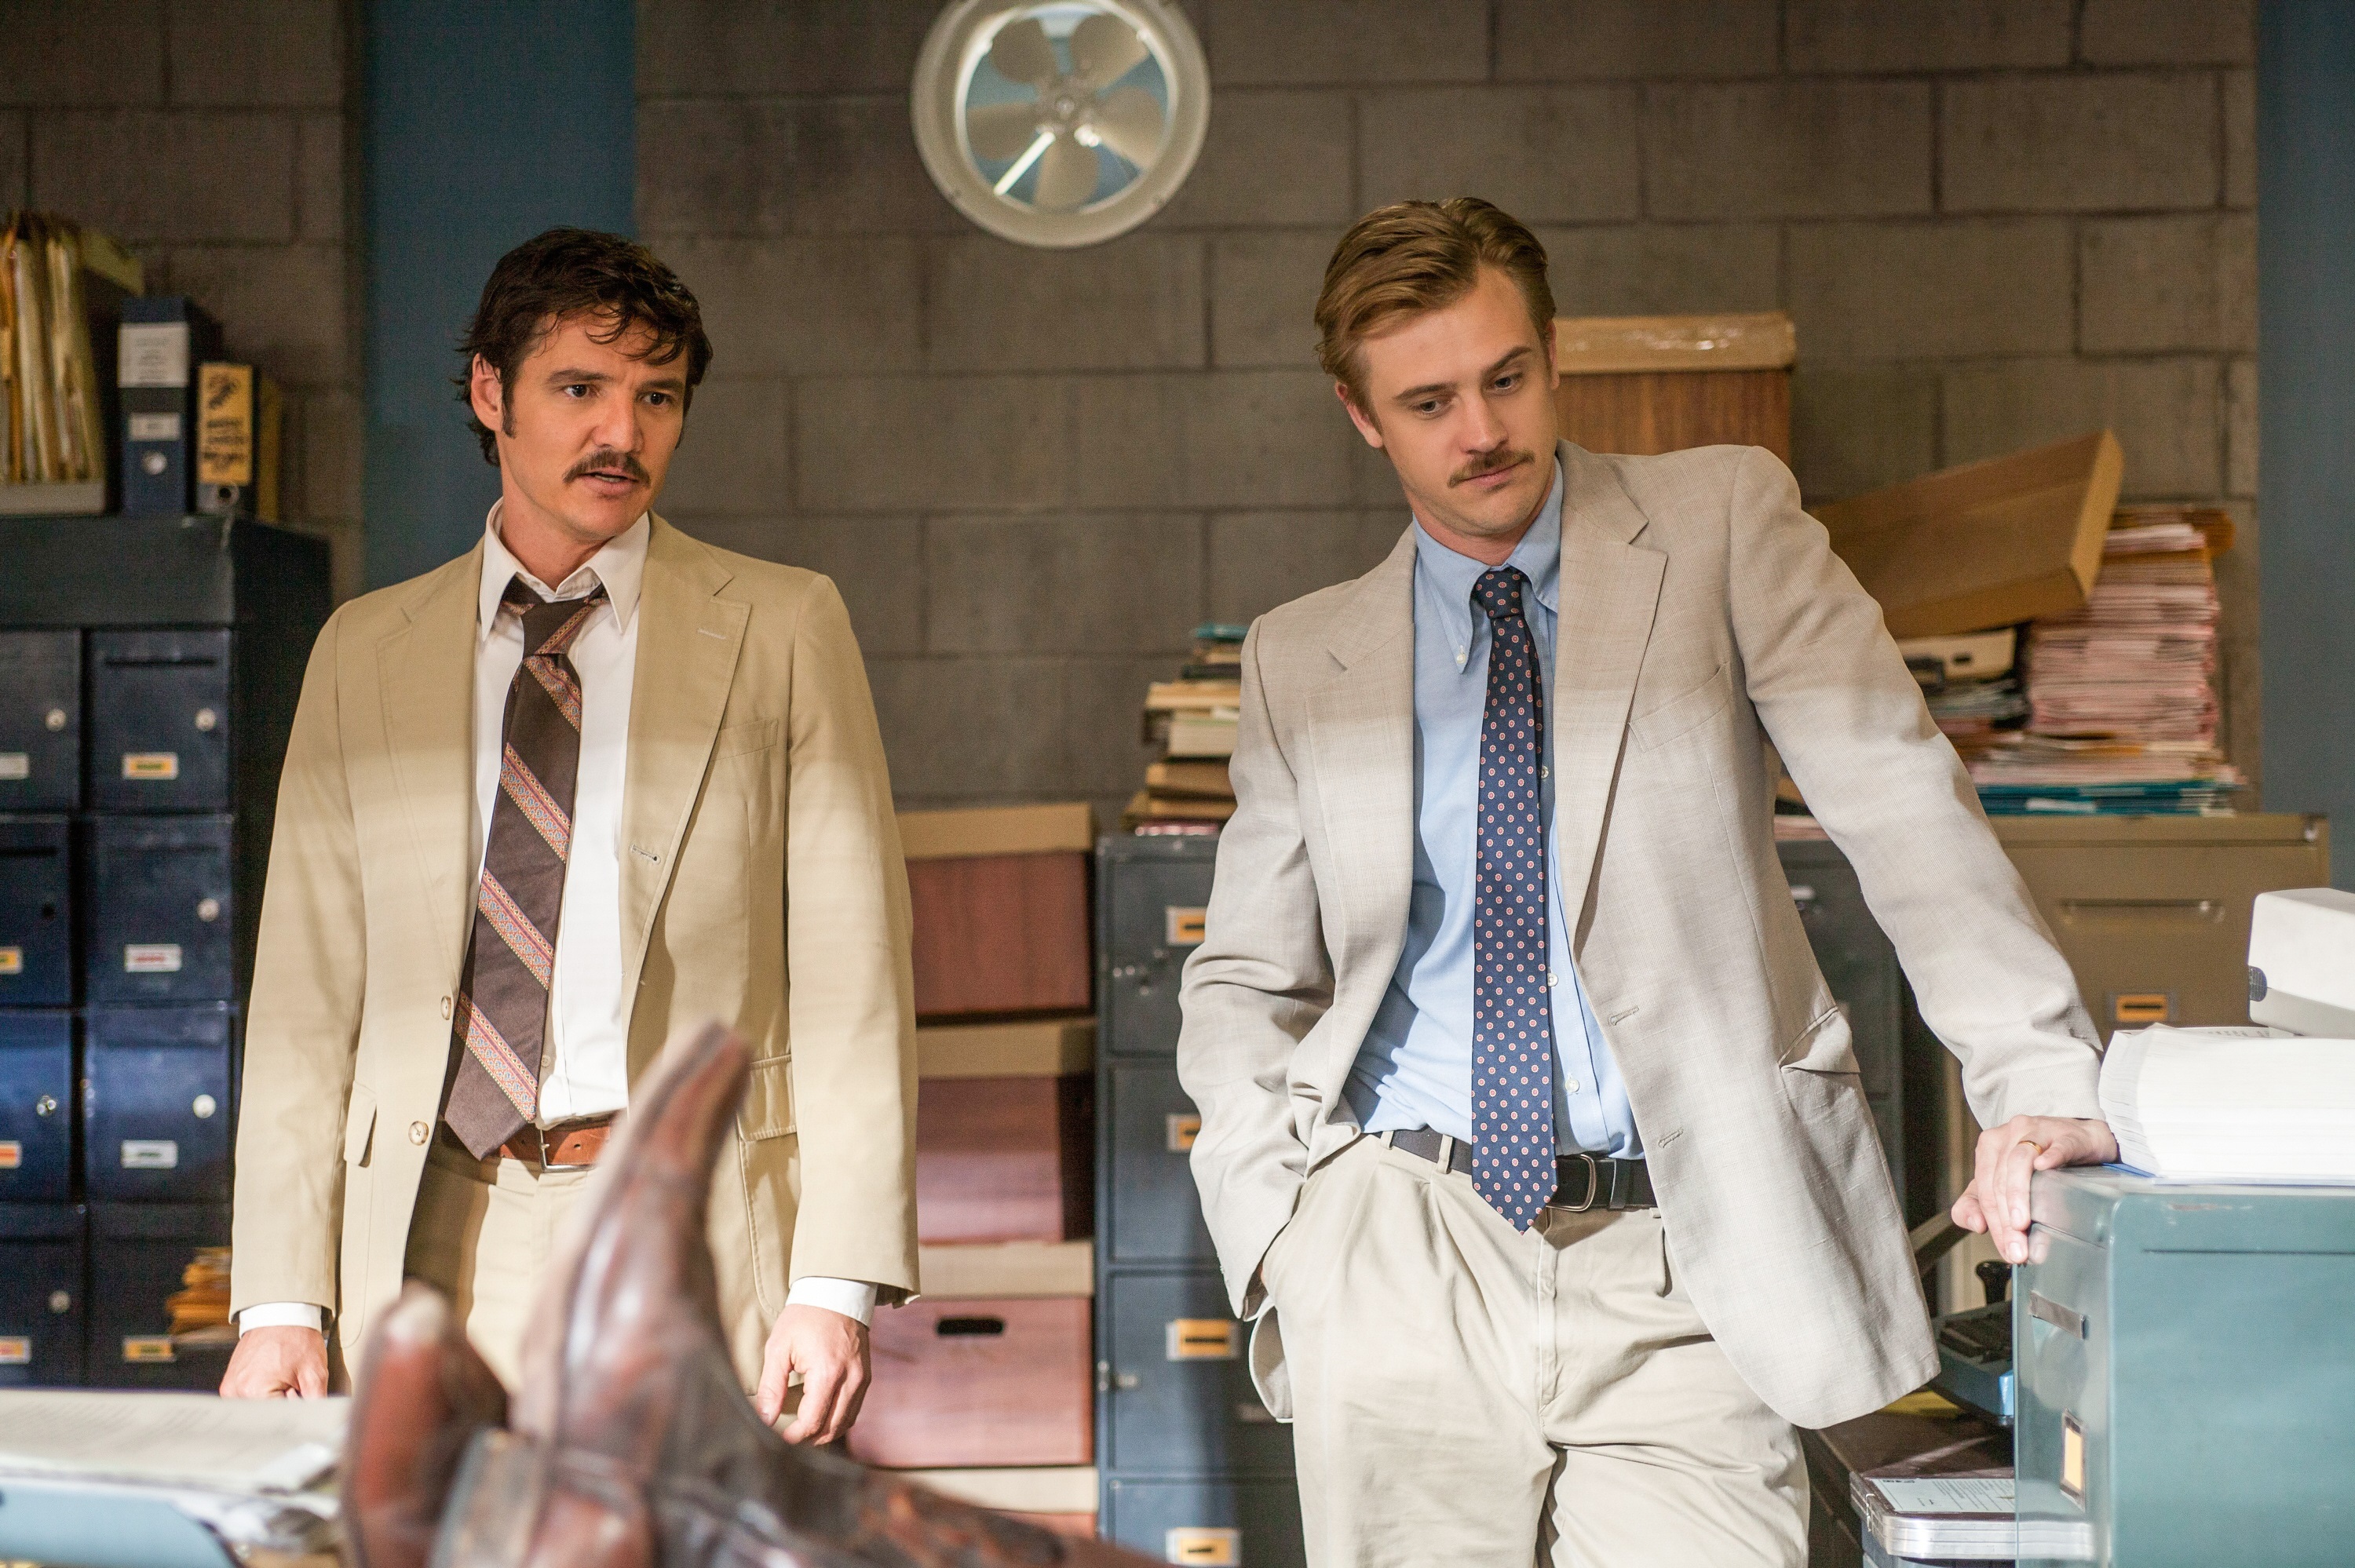 <p>Pedro Pascal (left) and Boyd Holbrook (right) starred on the Netflix original series "Narcos" as two drug enforcement agents sent to Colombia to take down notorious drug lord Pablo Escobar. The first three seasons of the biographical crime drama are available on Netflix, as is the first season of "Narcos: Mexico" -- a companion series that charts the rise of the Guadalajara drug cartel in the 1980s and stars Diego Luna, among others. The third season of companion series "Narcos: Mexico" was released in 2021.</p>